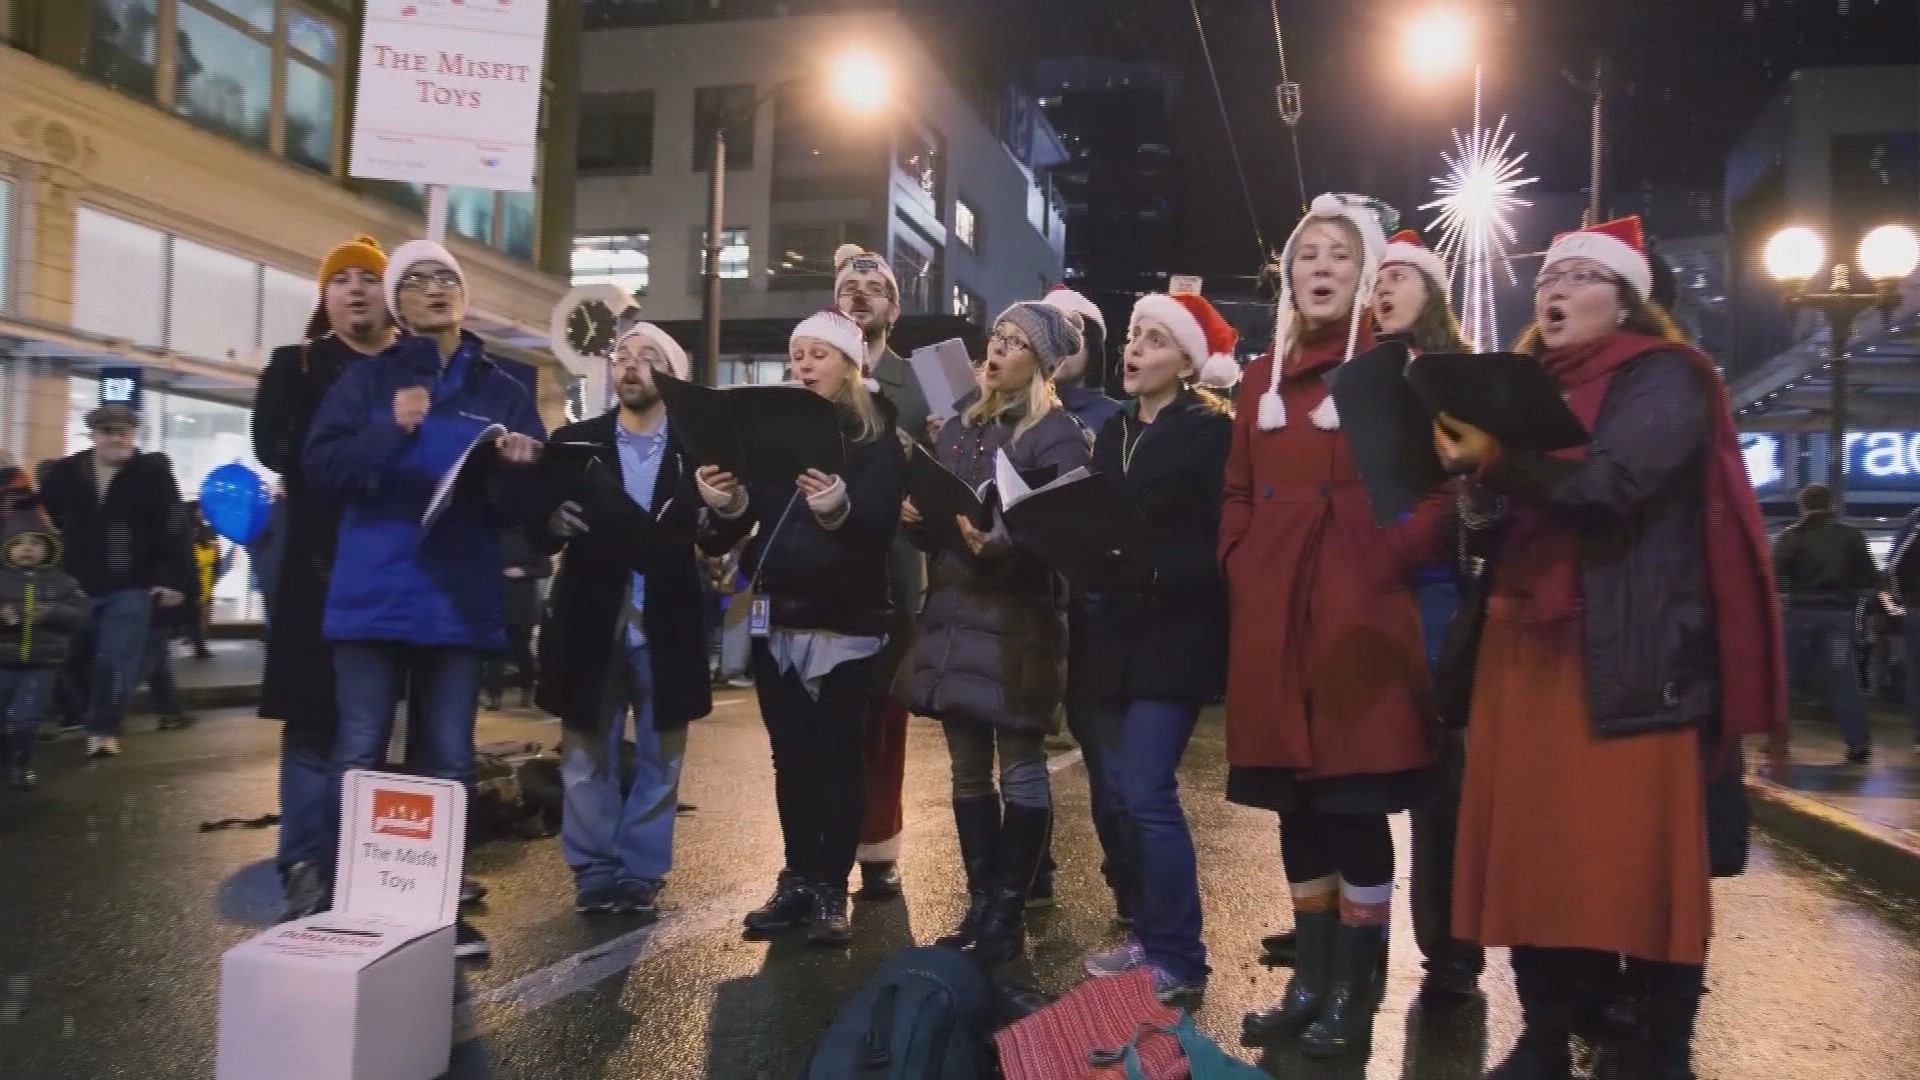 The Great Figgy Pudding Caroling Contest is signing up new talent.